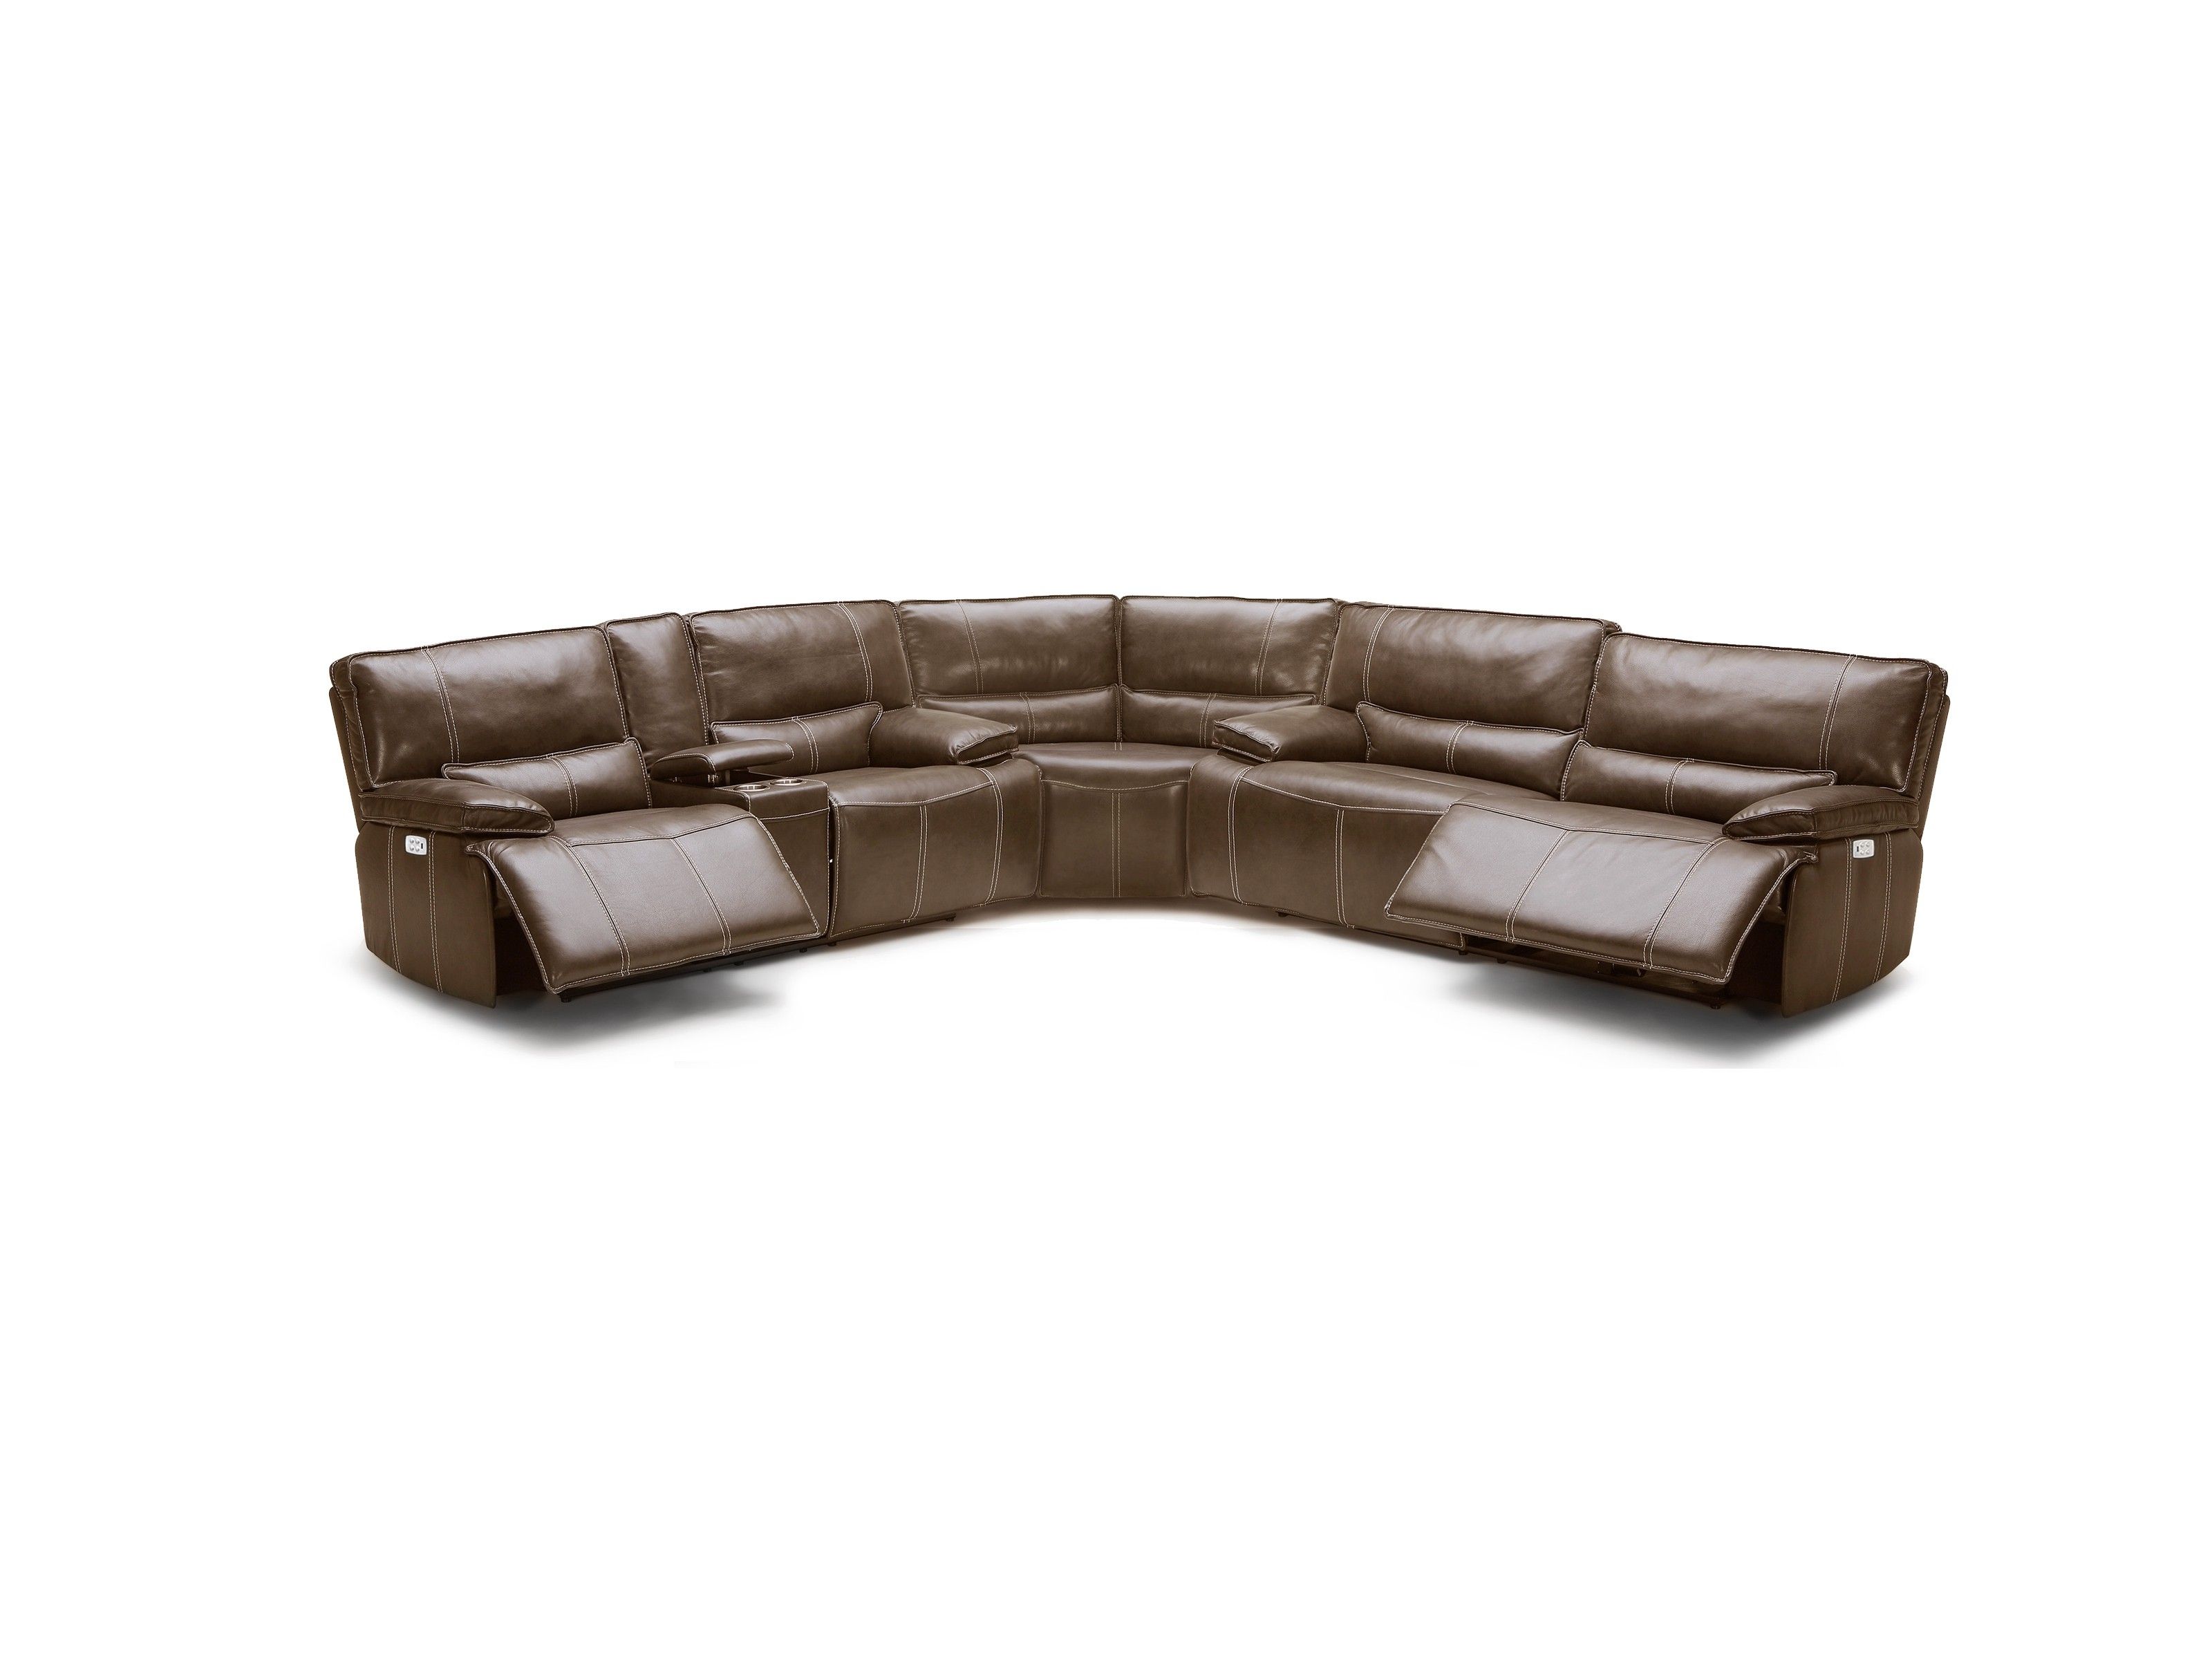 Sectional Sofas, Leather Sectional, Couch | Watson's Intended For Grand Rapids Mi Sectional Sofas (View 10 of 10)